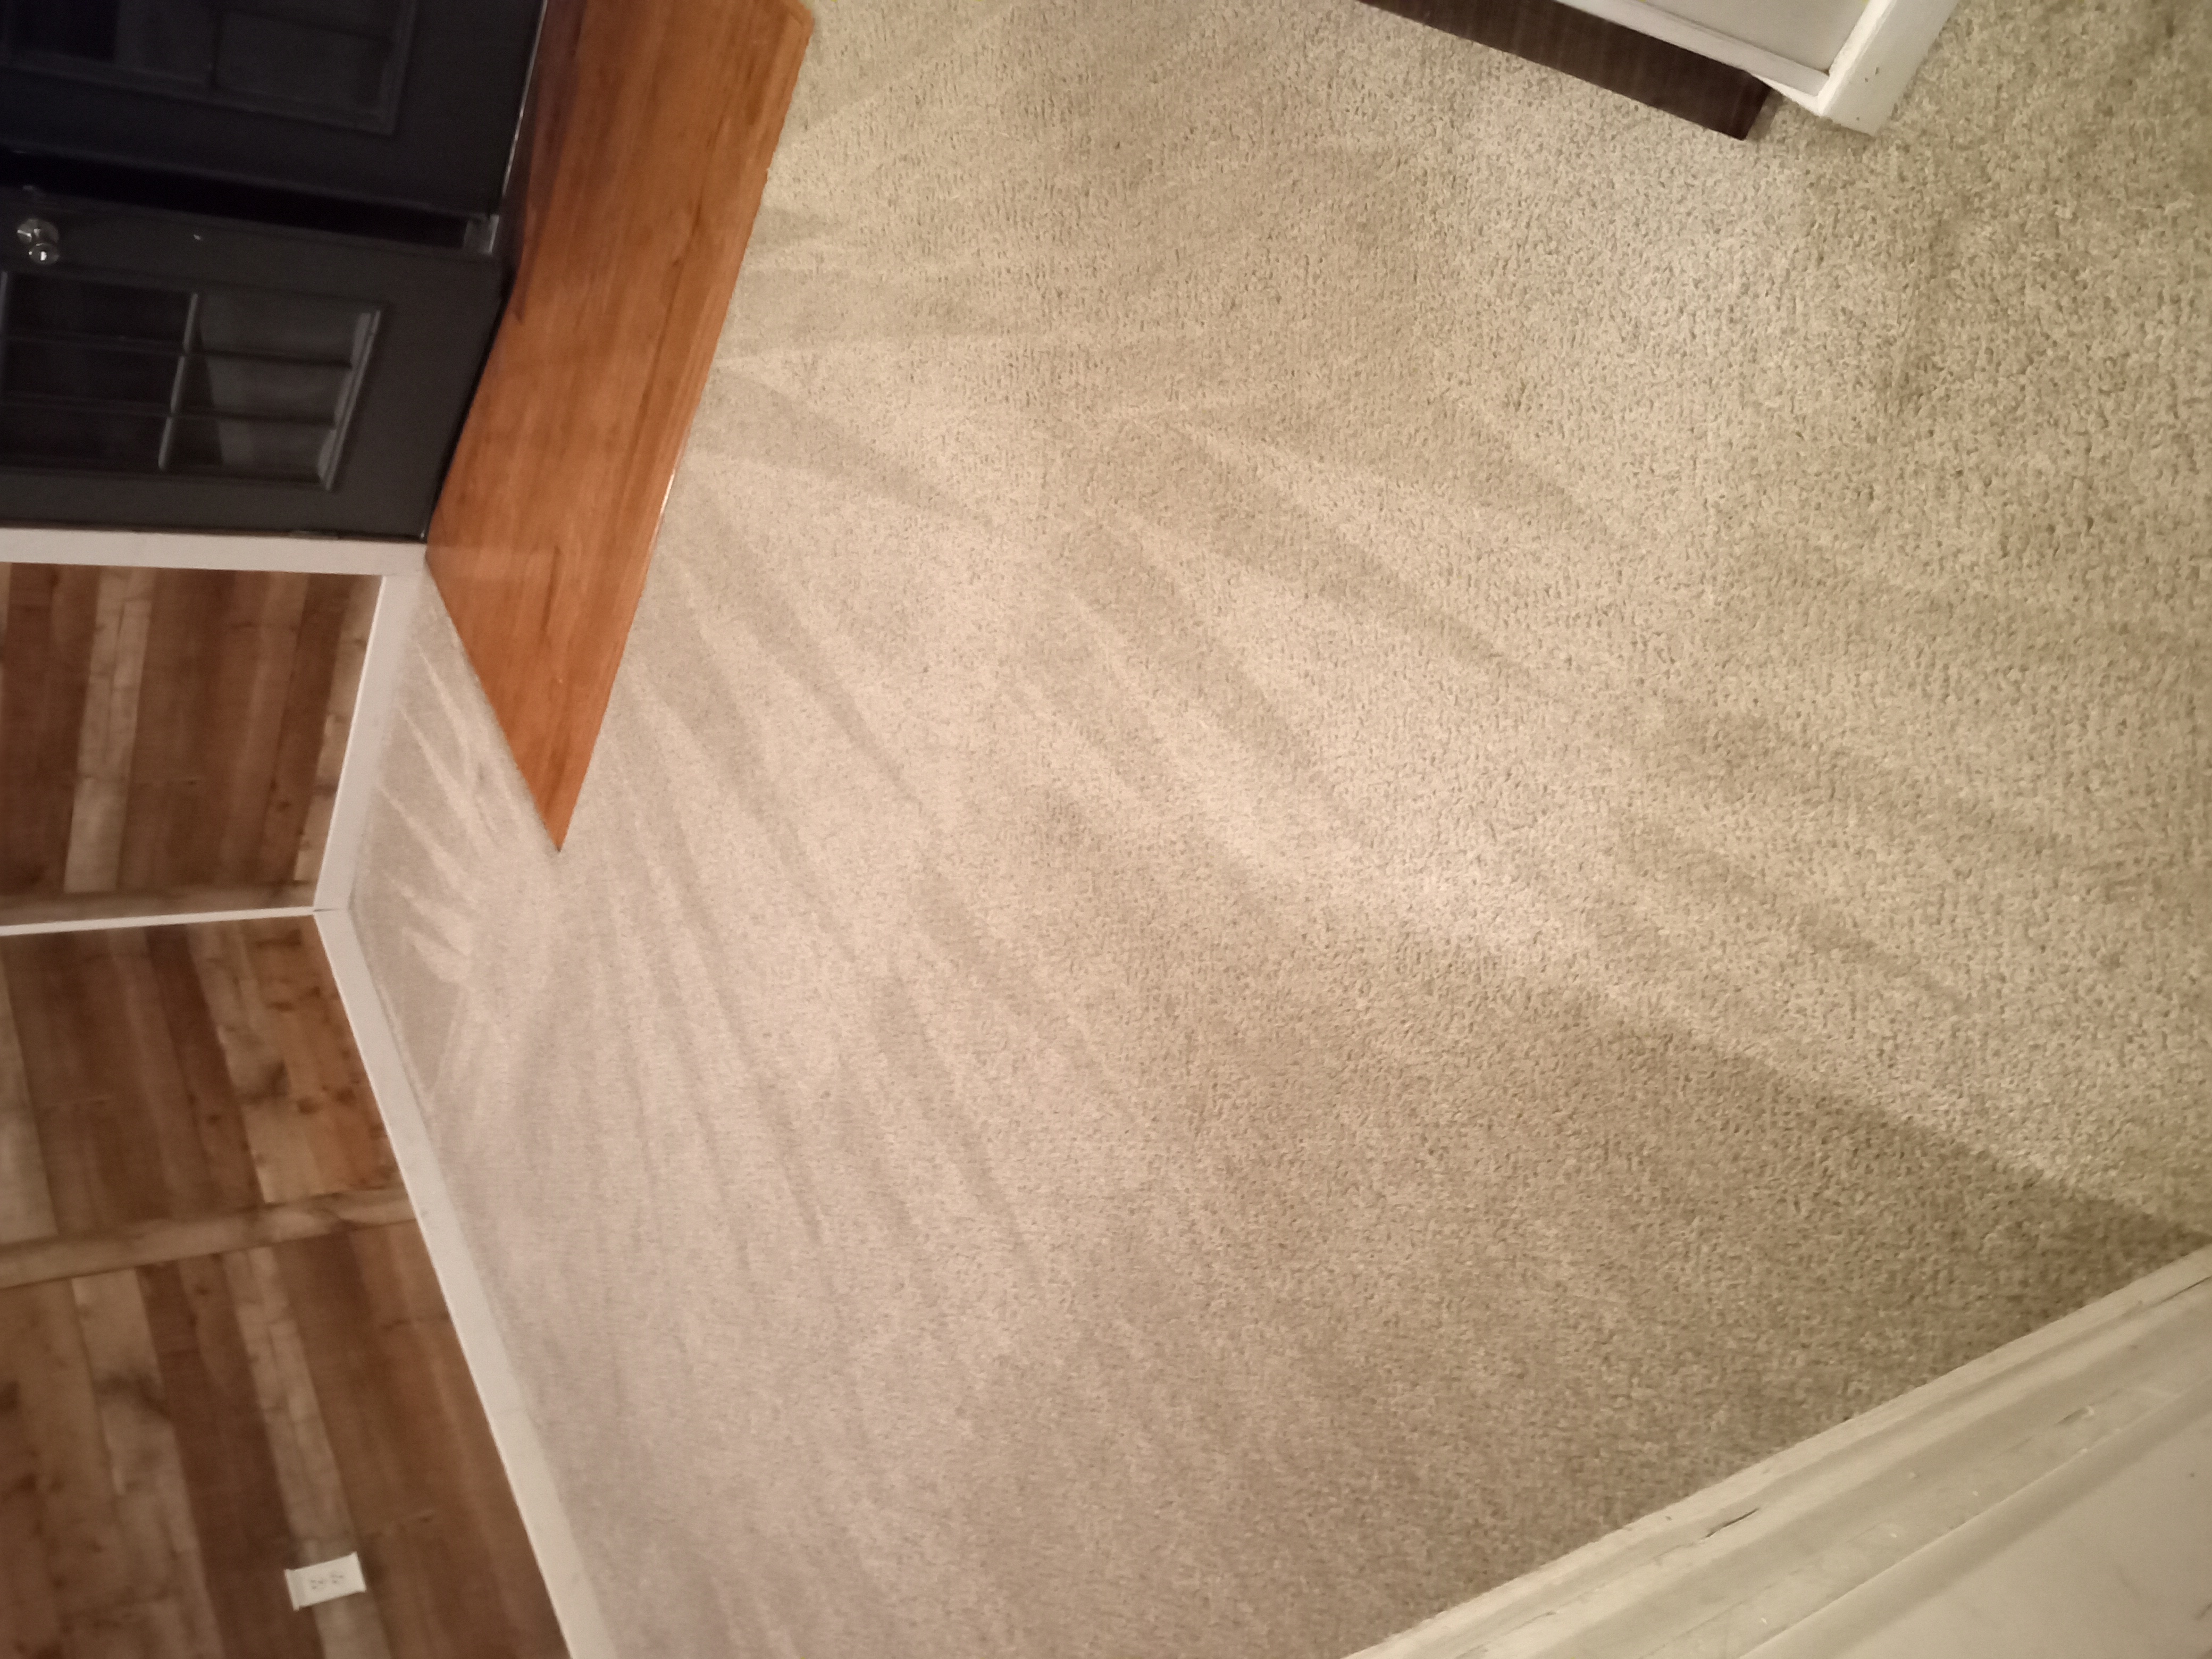 Carpet cleaning using hot water extraction is the most highly recommend cleaning method.